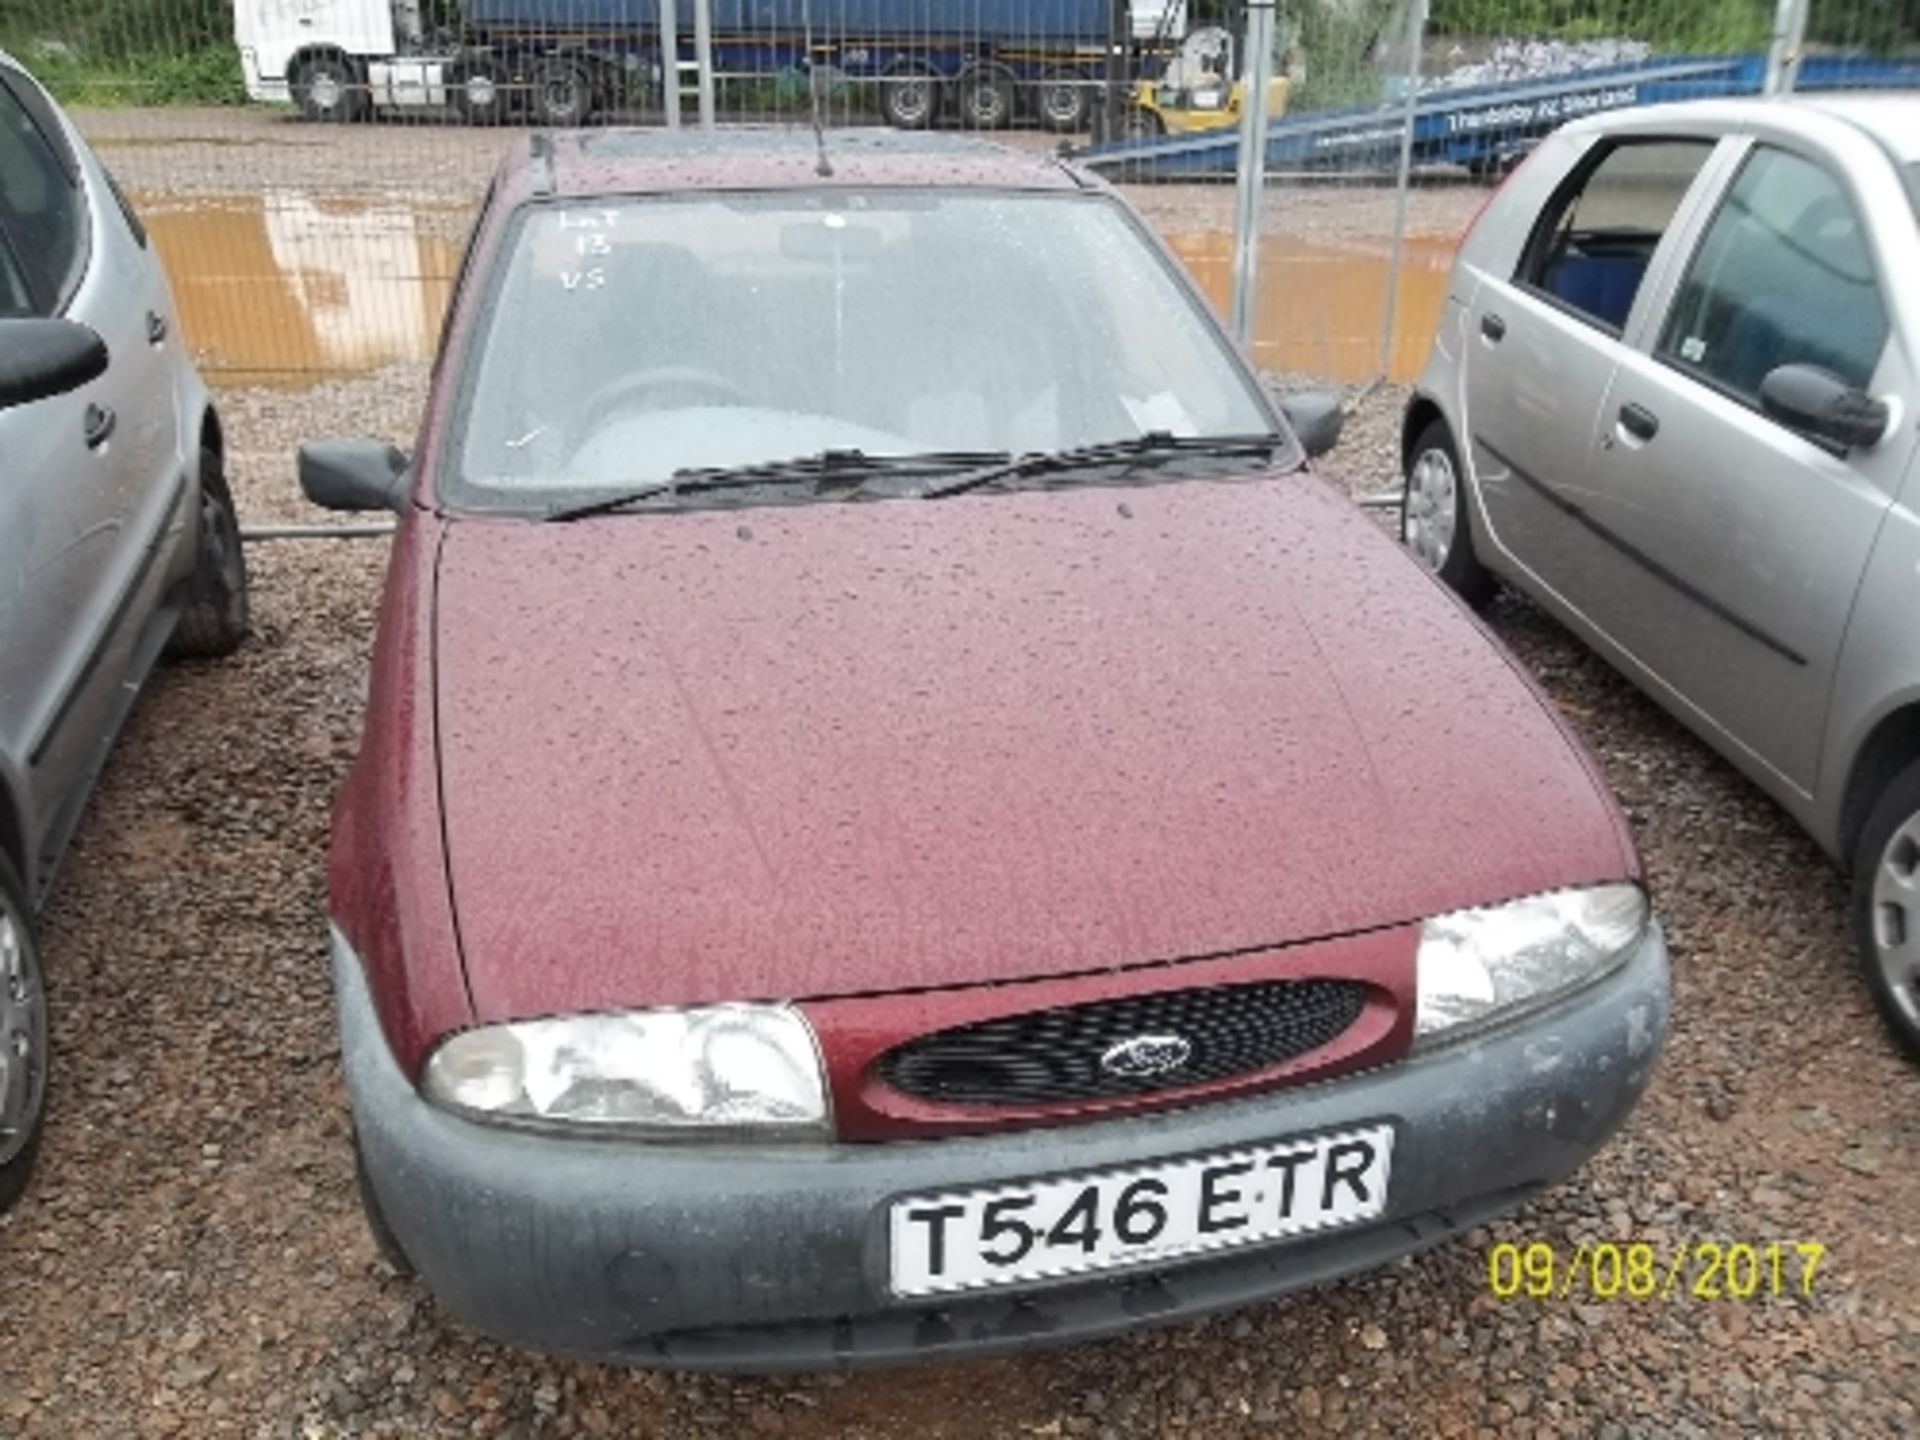 Ford Fiesta Finesse - T546 ETR Date of registration: 23.04.1999 1299cc, petrol, manual, red Odometer